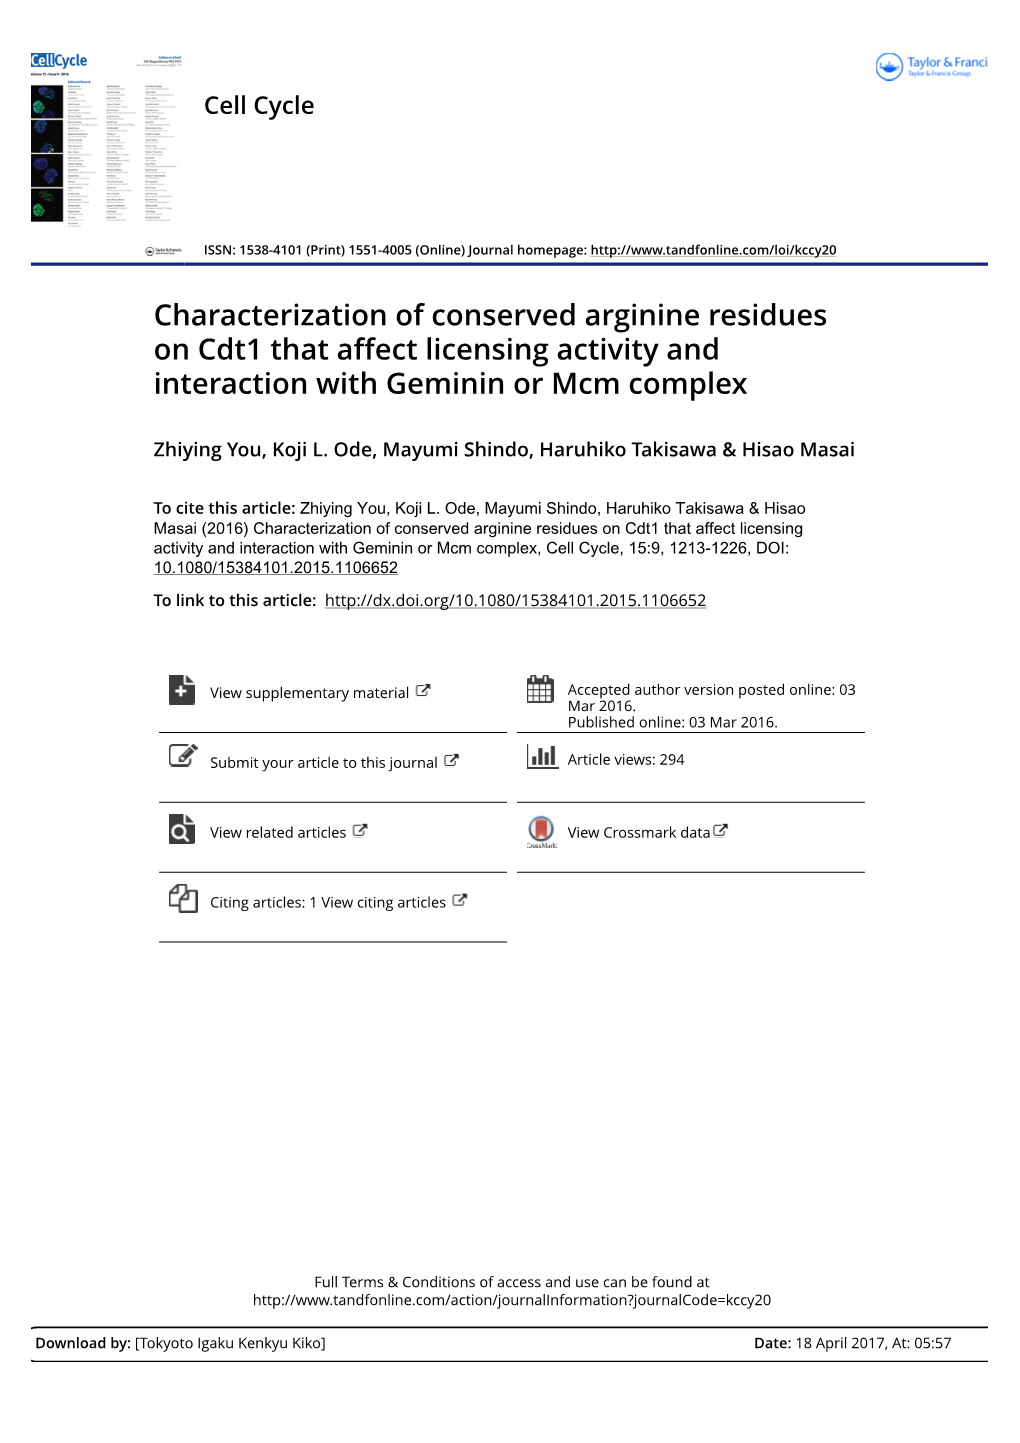 Characterization of Conserved Arginine Residues on Cdt1 That Affect Licensing Activity and Interaction with Geminin Or Mcm Complex